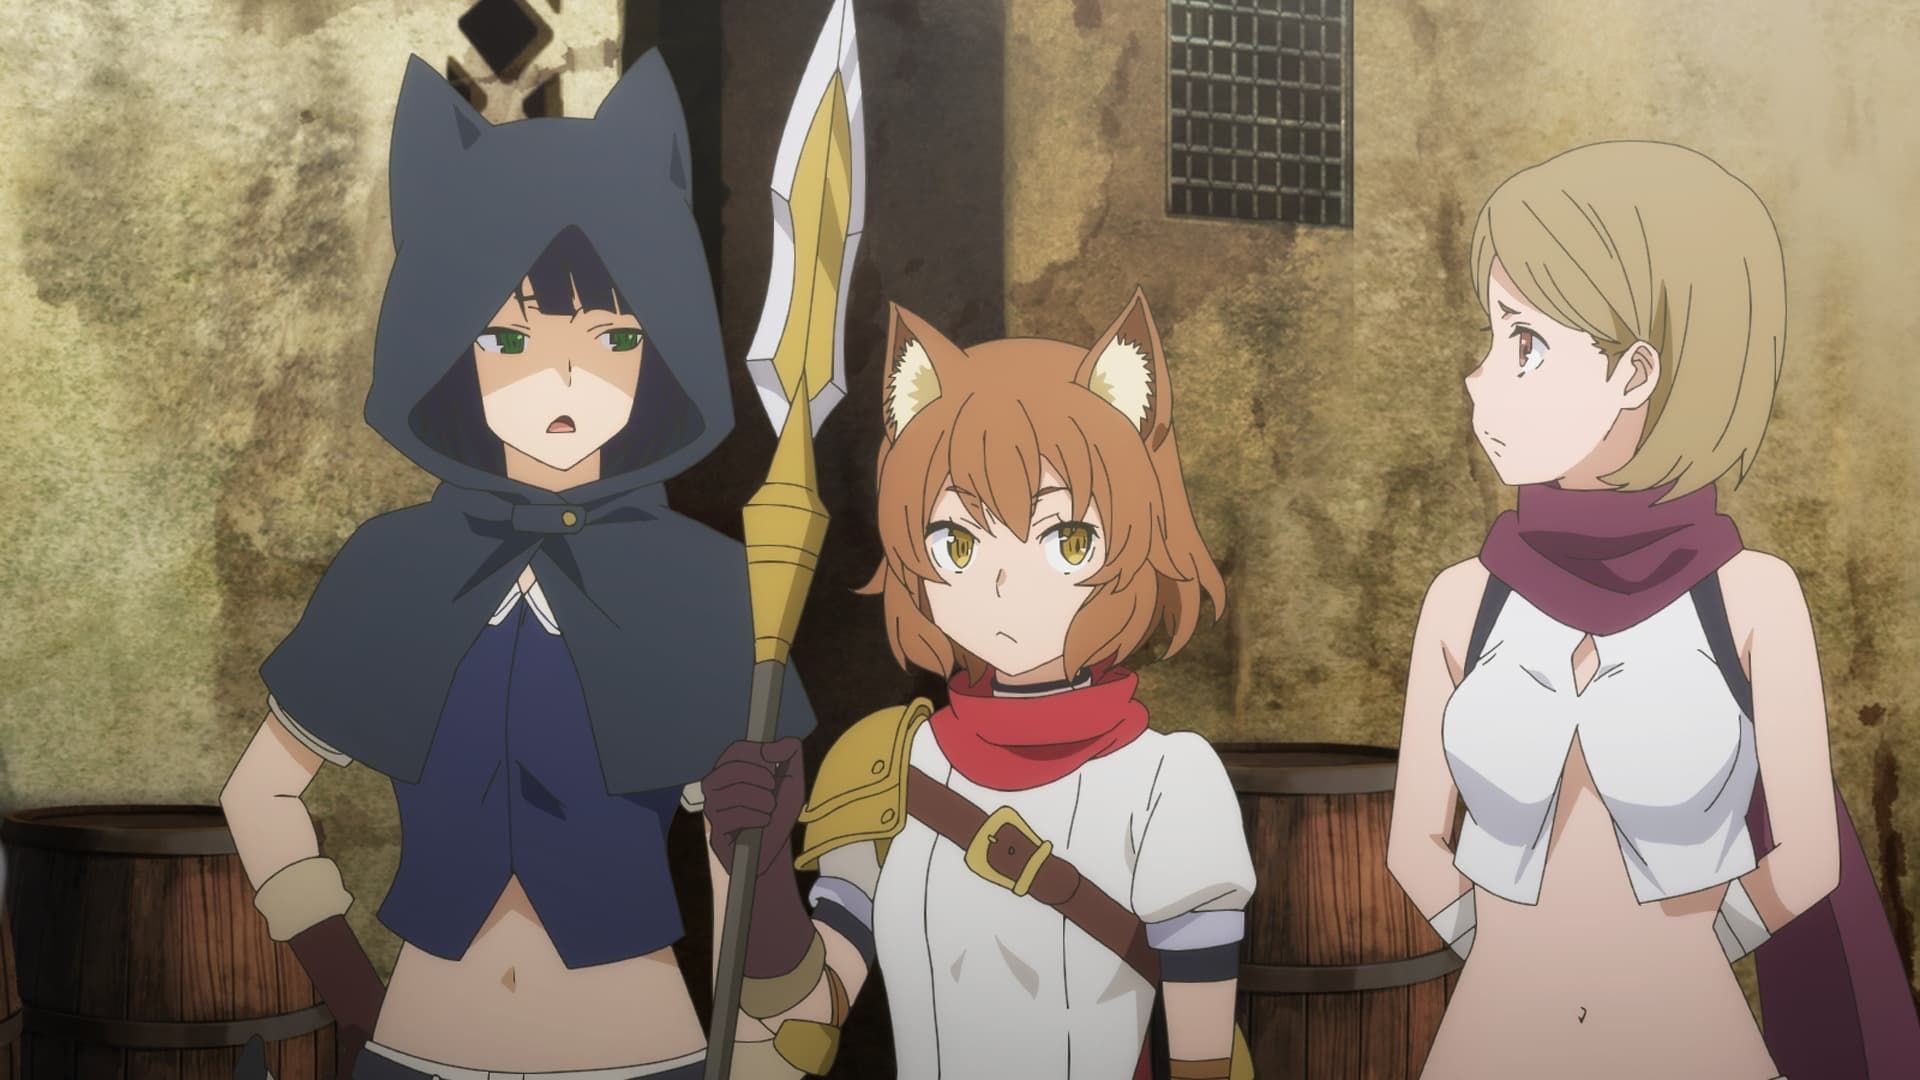 Watch Is It Wrong to Try to Pick Up Girls in a Dungeon? season 4